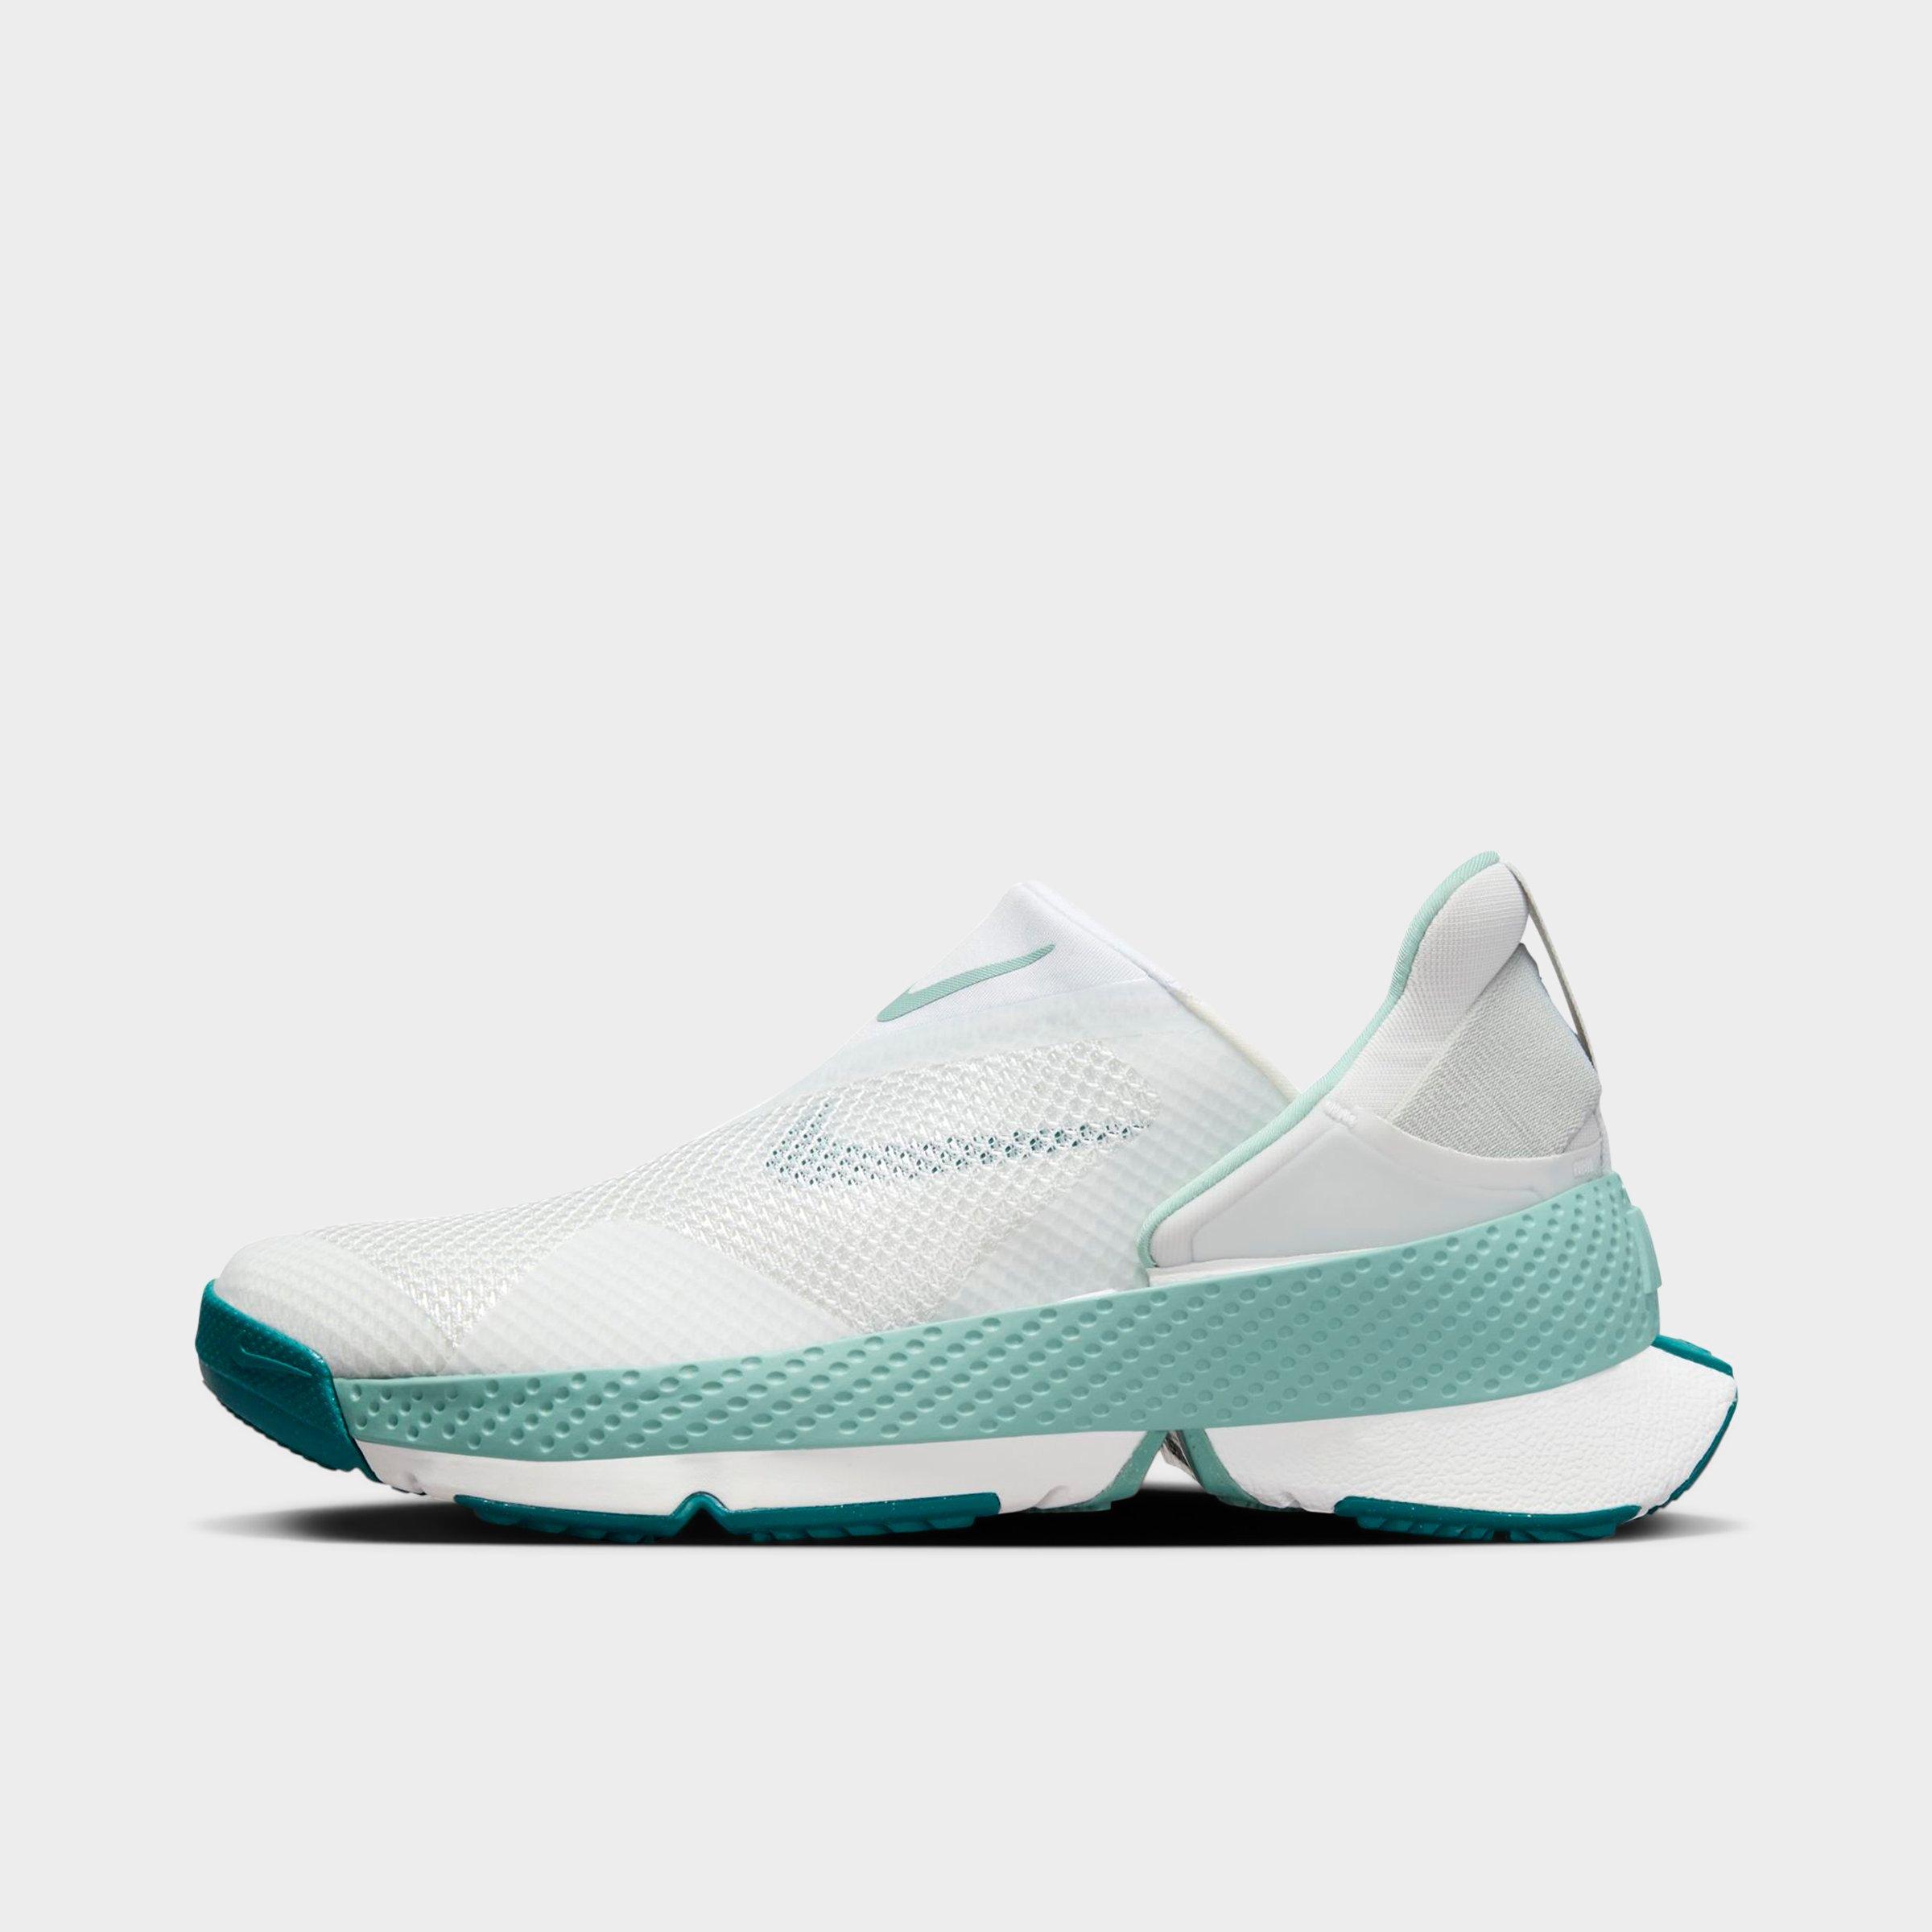 Nike Women's Go Flyease Running Shoes In Photon Dust/geode Teal/summit White/mineral